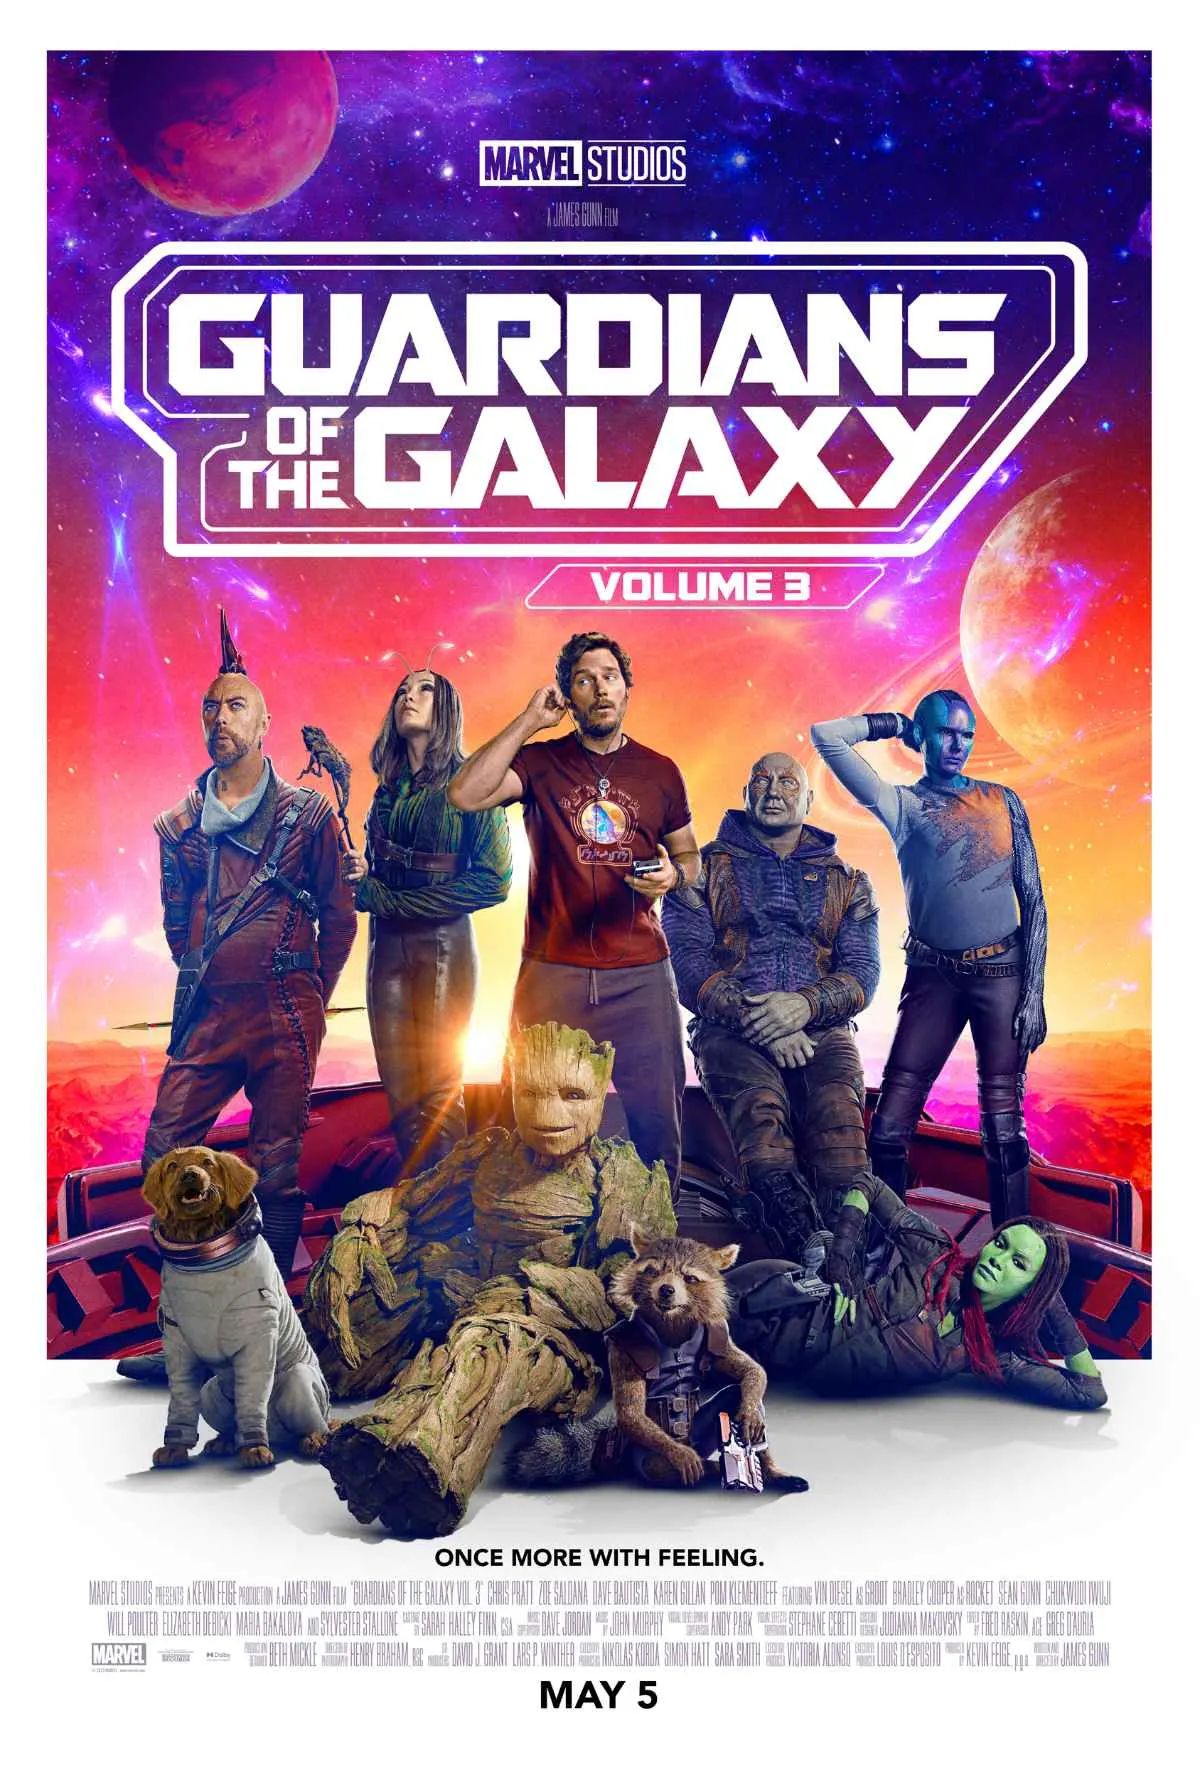 Guardians of the Galaxy Vol. 3 Trailer